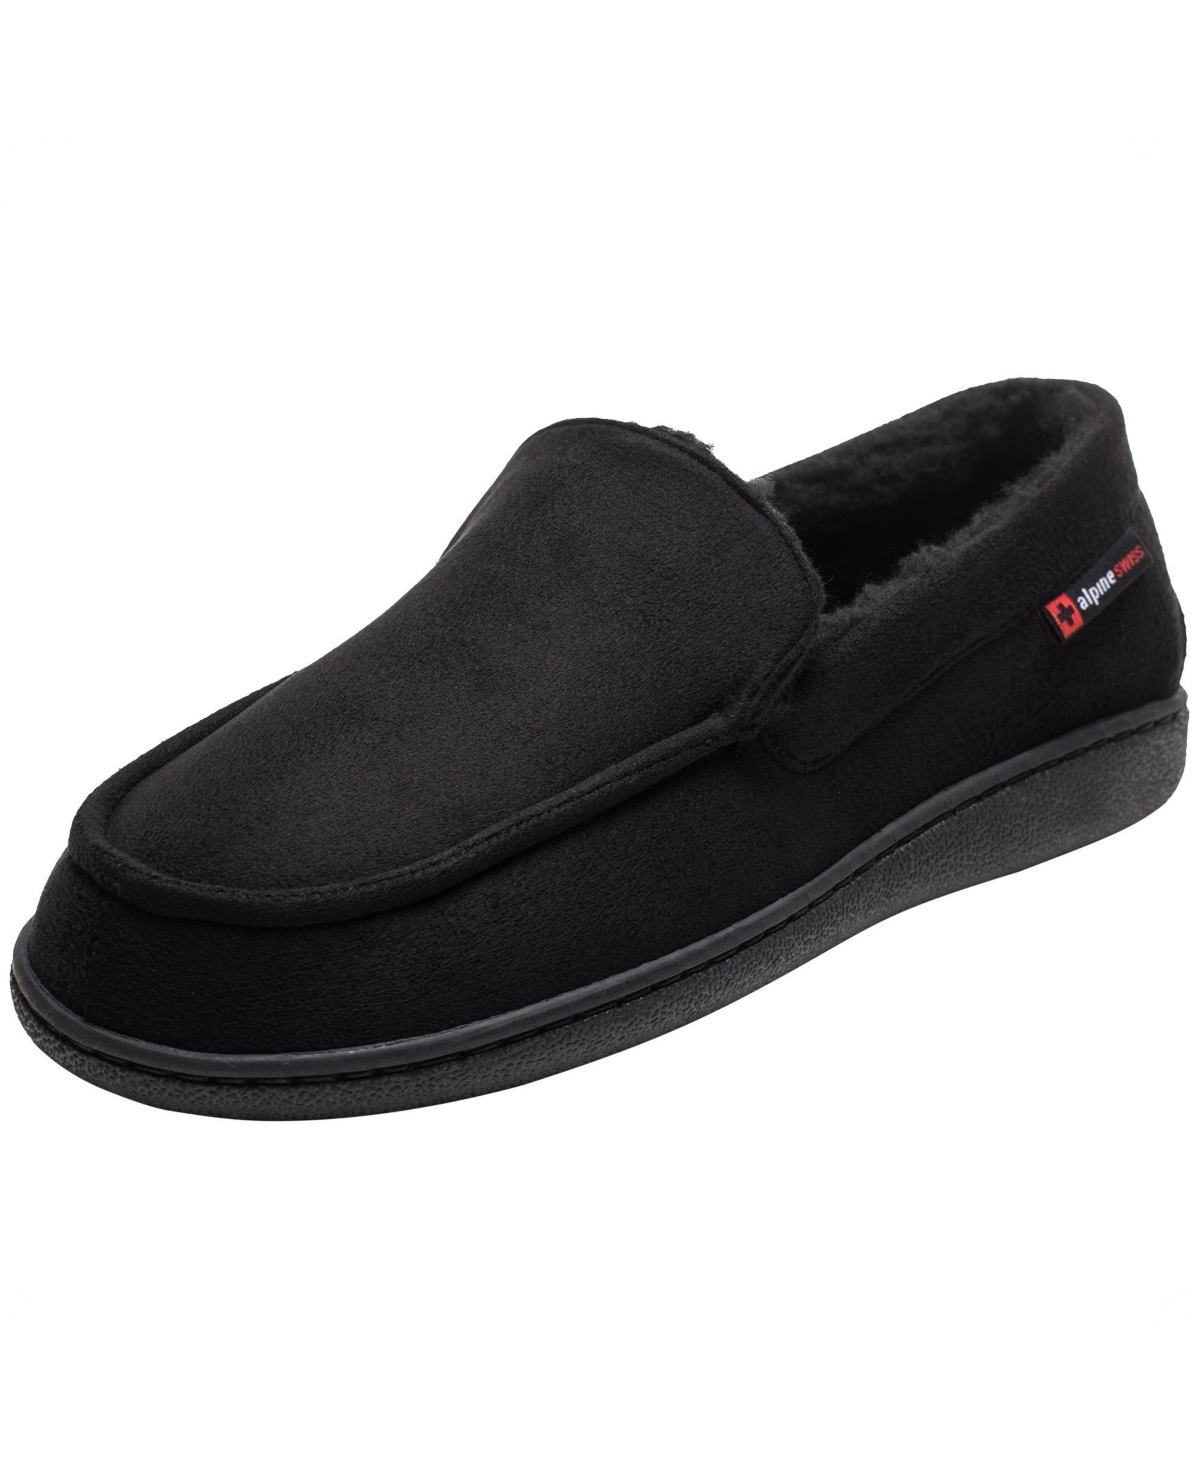 Oslo Mens Moccasin Slippers Warm Shearling Comfortable House Shoes - Black